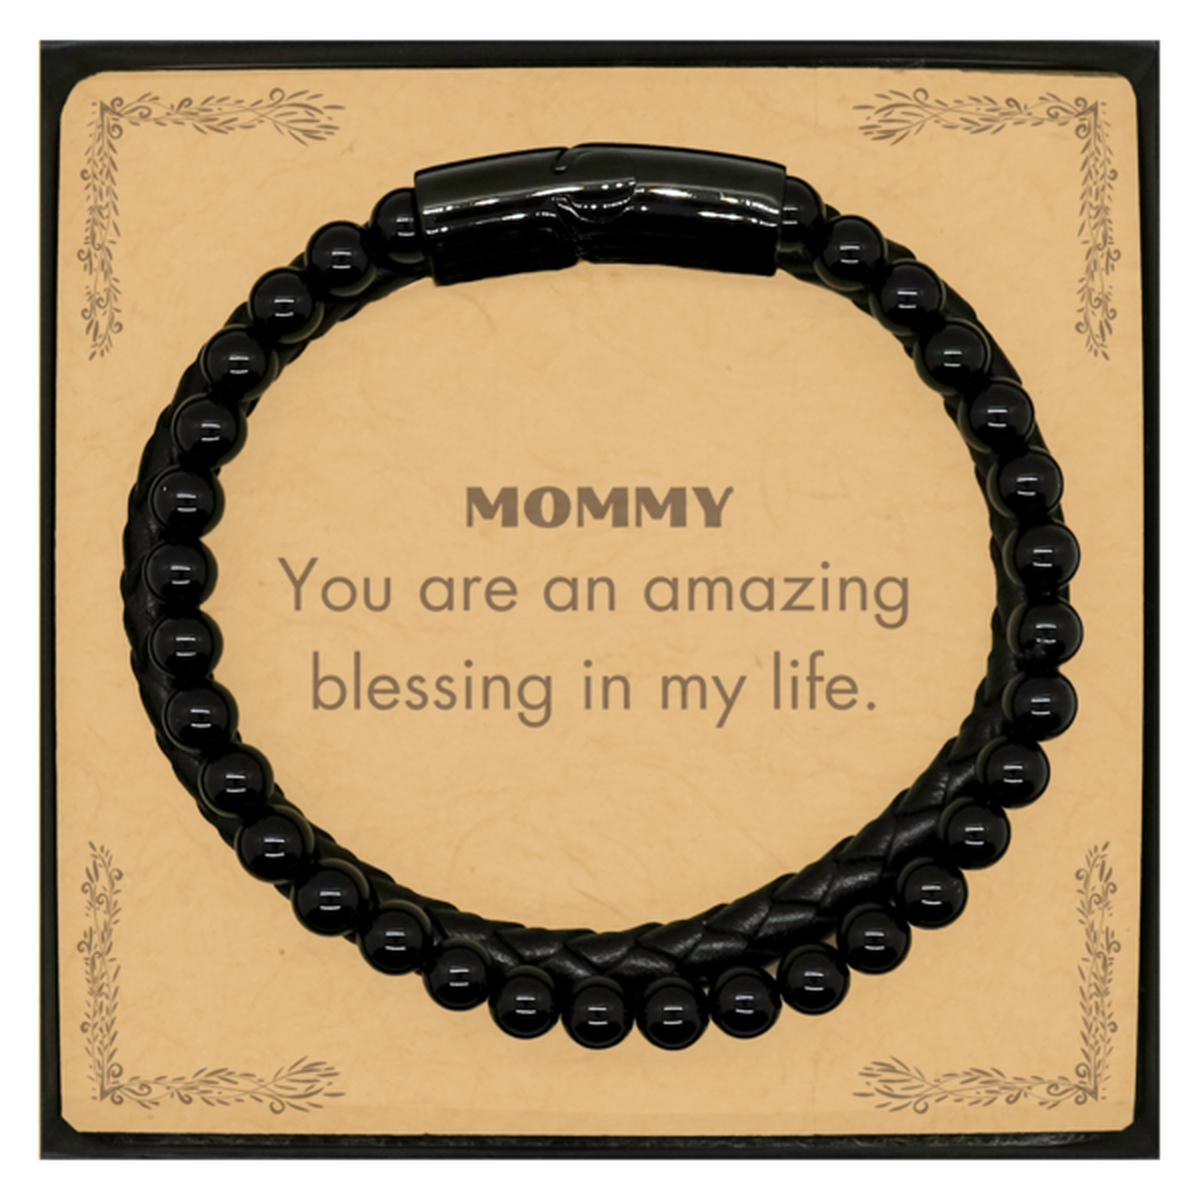 Mommy Stone Leather Bracelets, You are an amazing blessing in my life, Thank You Gifts For Mommy, Inspirational Birthday Christmas Unique Gifts For Mommy